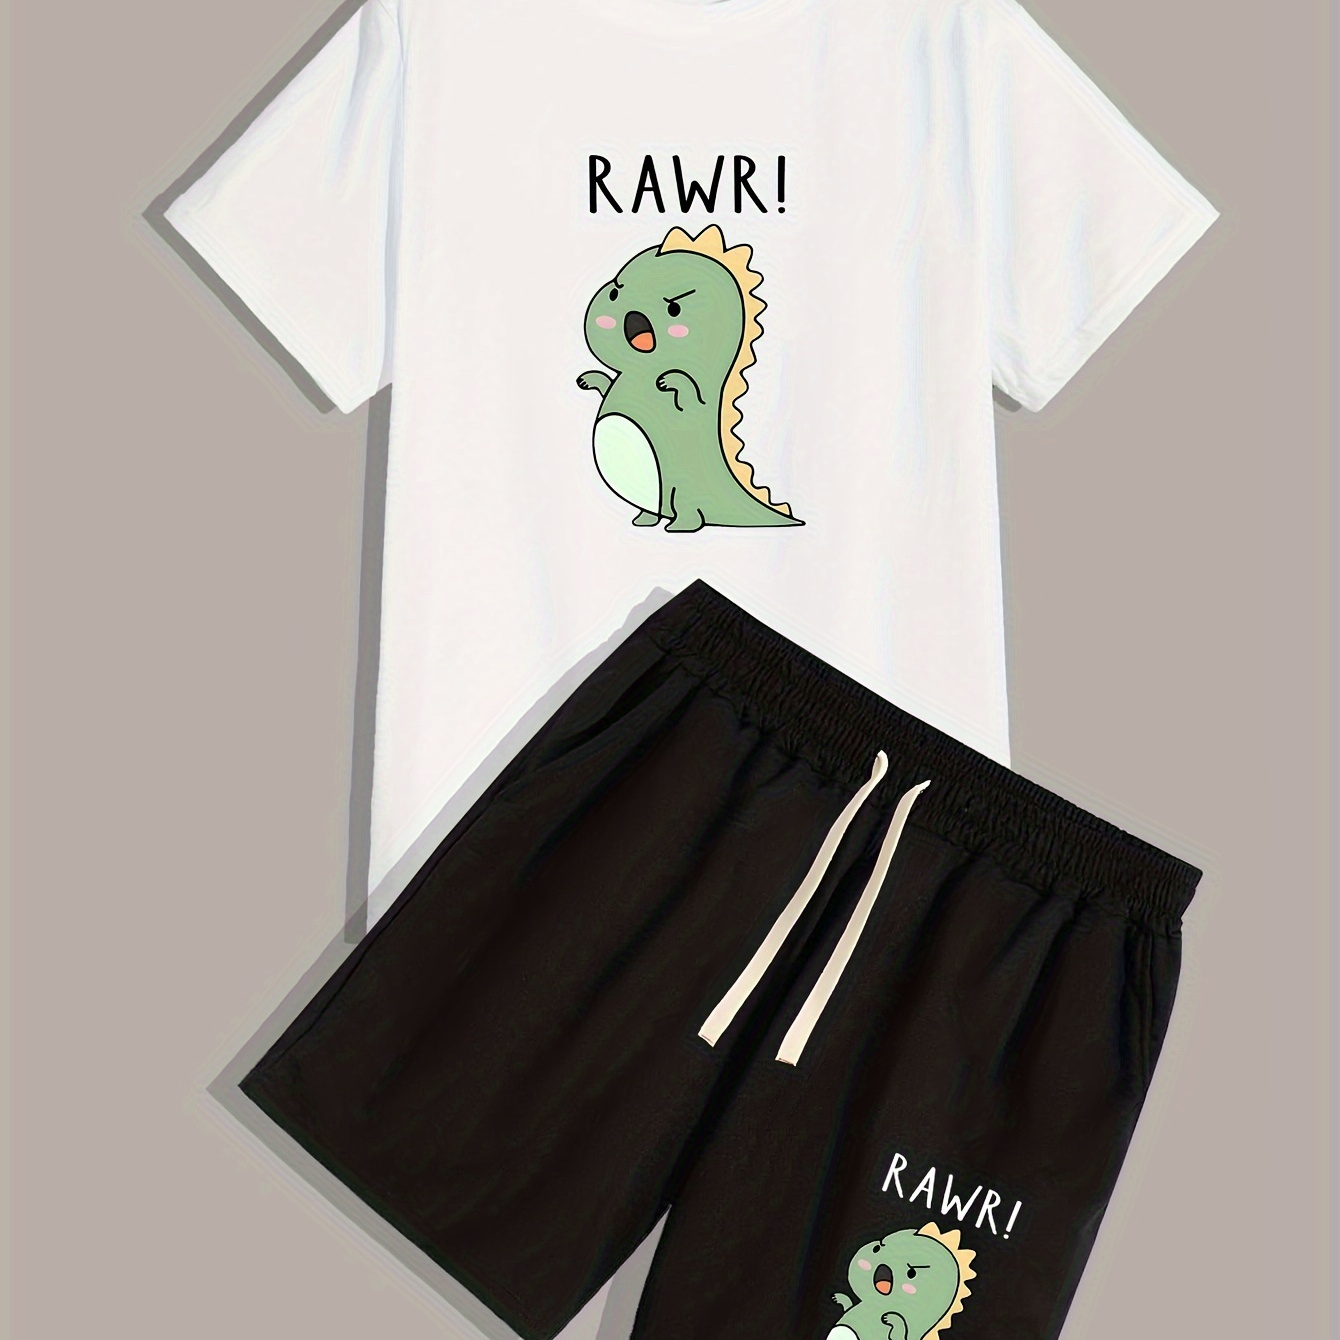 

Little Green Dinosaur Rawr! Print Men's 2pcs Short Sleeve Shorts Set Casual Sports Regular Top Drawstring Pants Suit Outfits For Spring Summer Holiday Leisure Vacation Outdoor Fitness